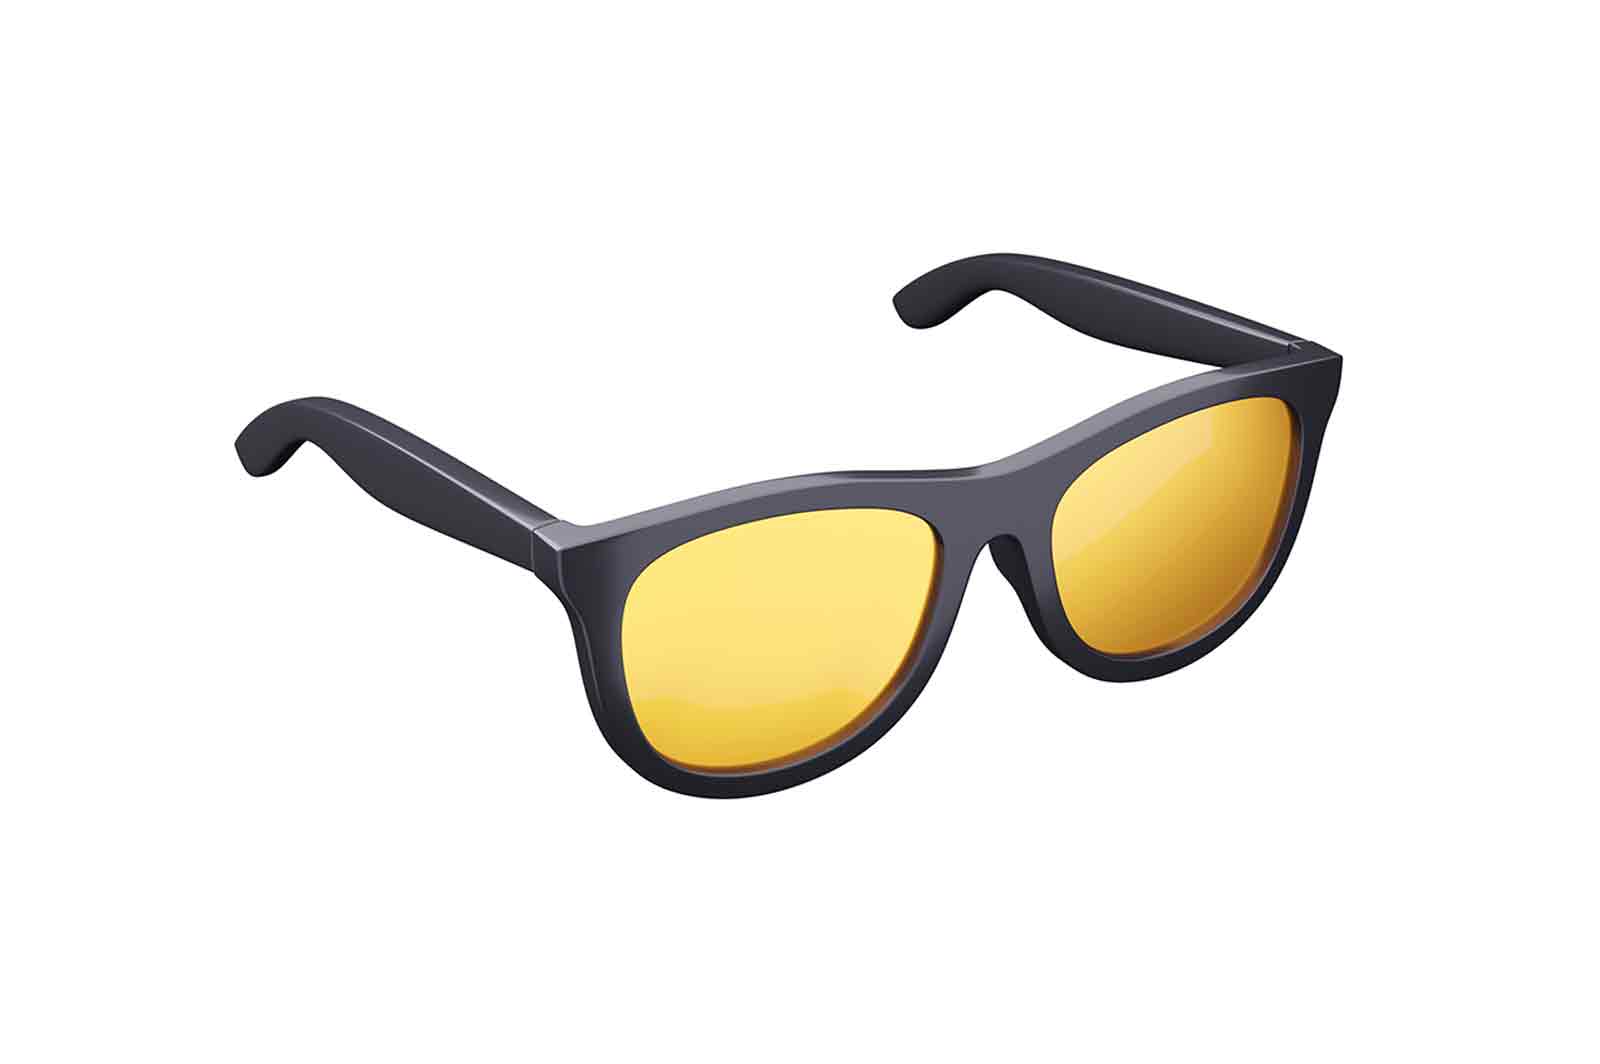 Trendy summer sunglasses with yellow lens 3d rendered icon illustration. Glasses tinted to protect eyes from sunlight